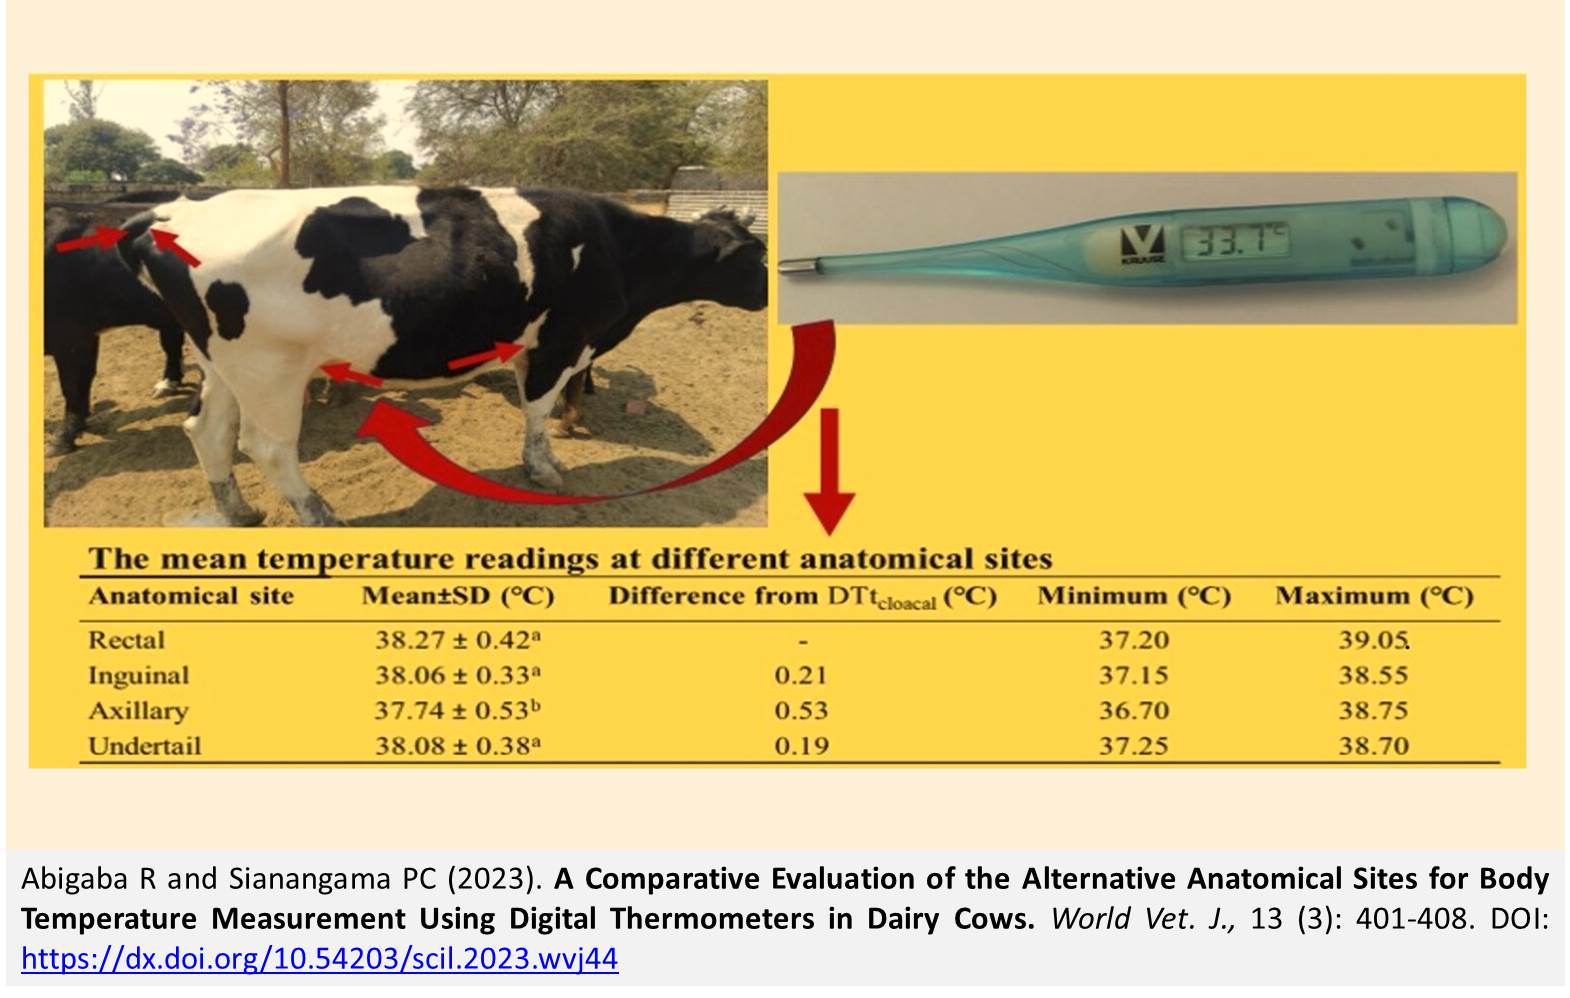 240-Body_Temperature_Measurement_Using_Thermometers_in_Dairy_Cows